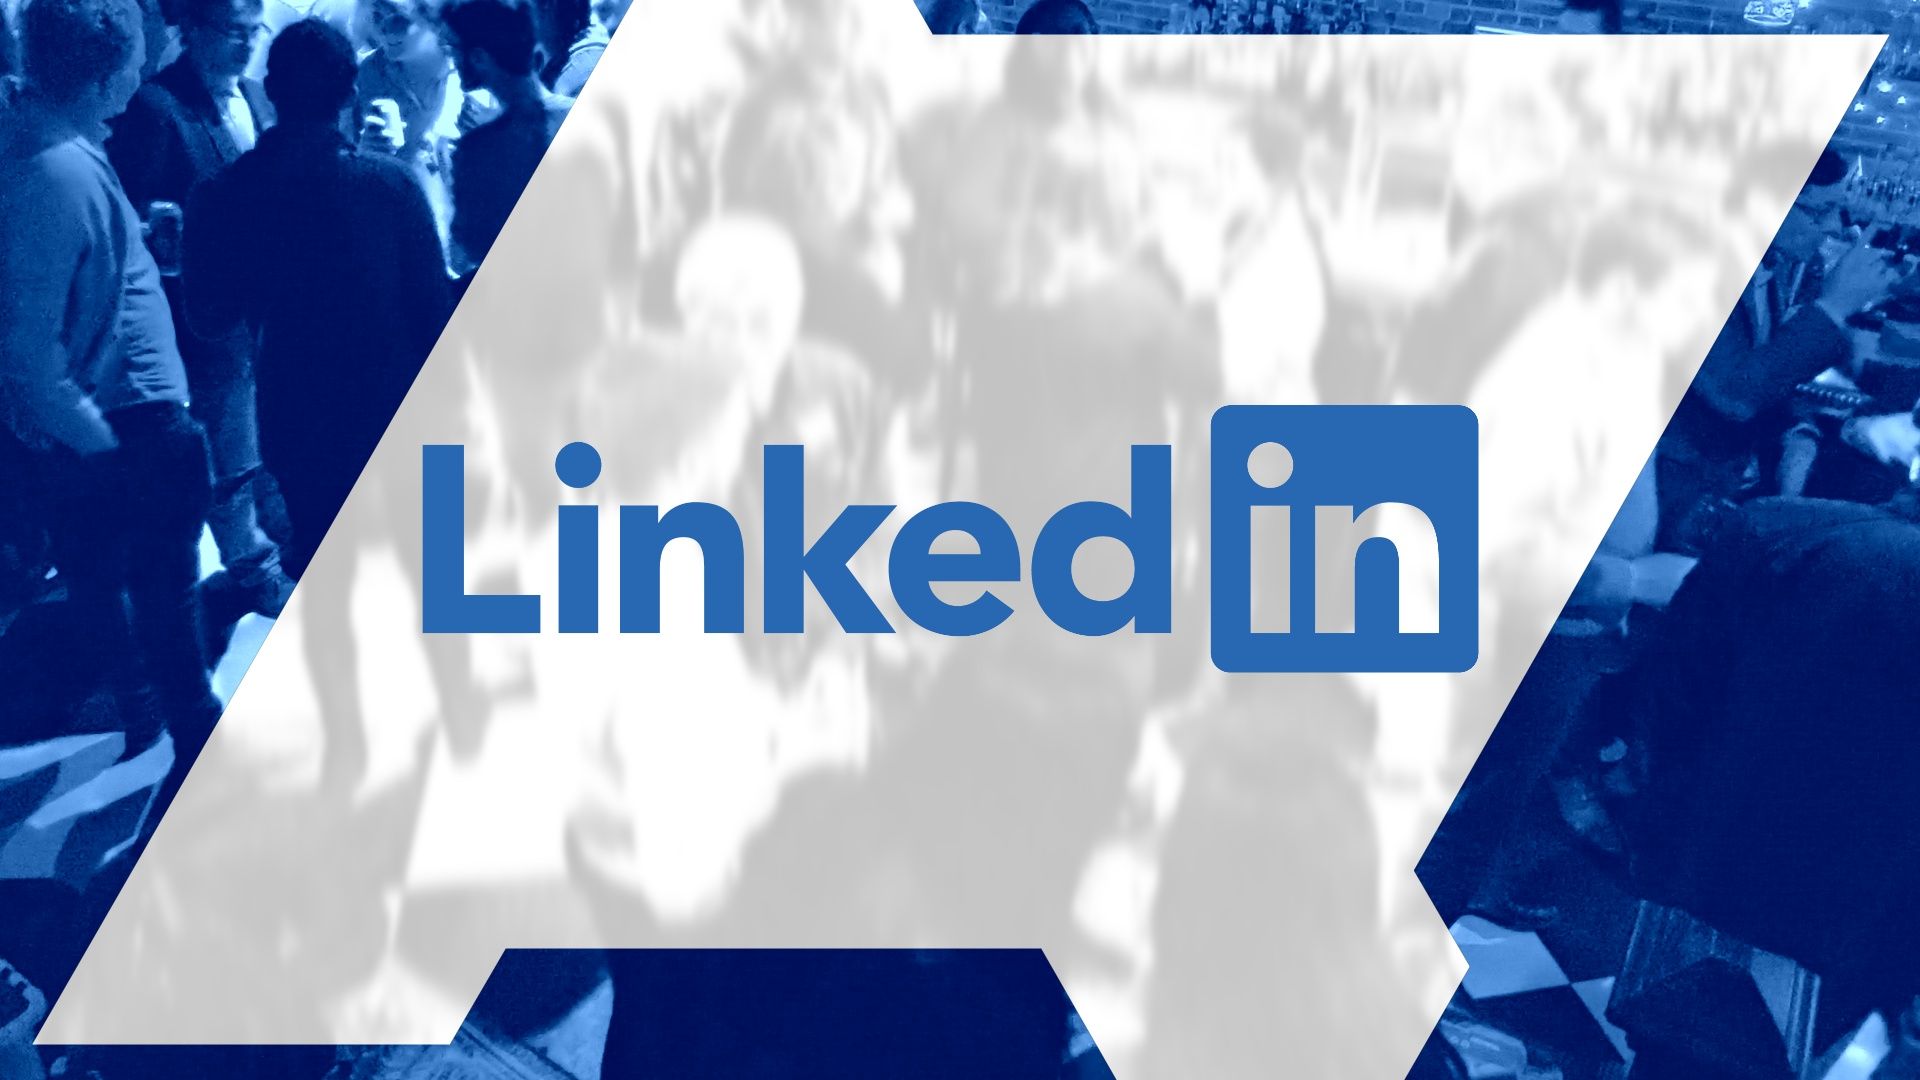 How to Stop LinkedIn from Telling People You Viewed Their Profile